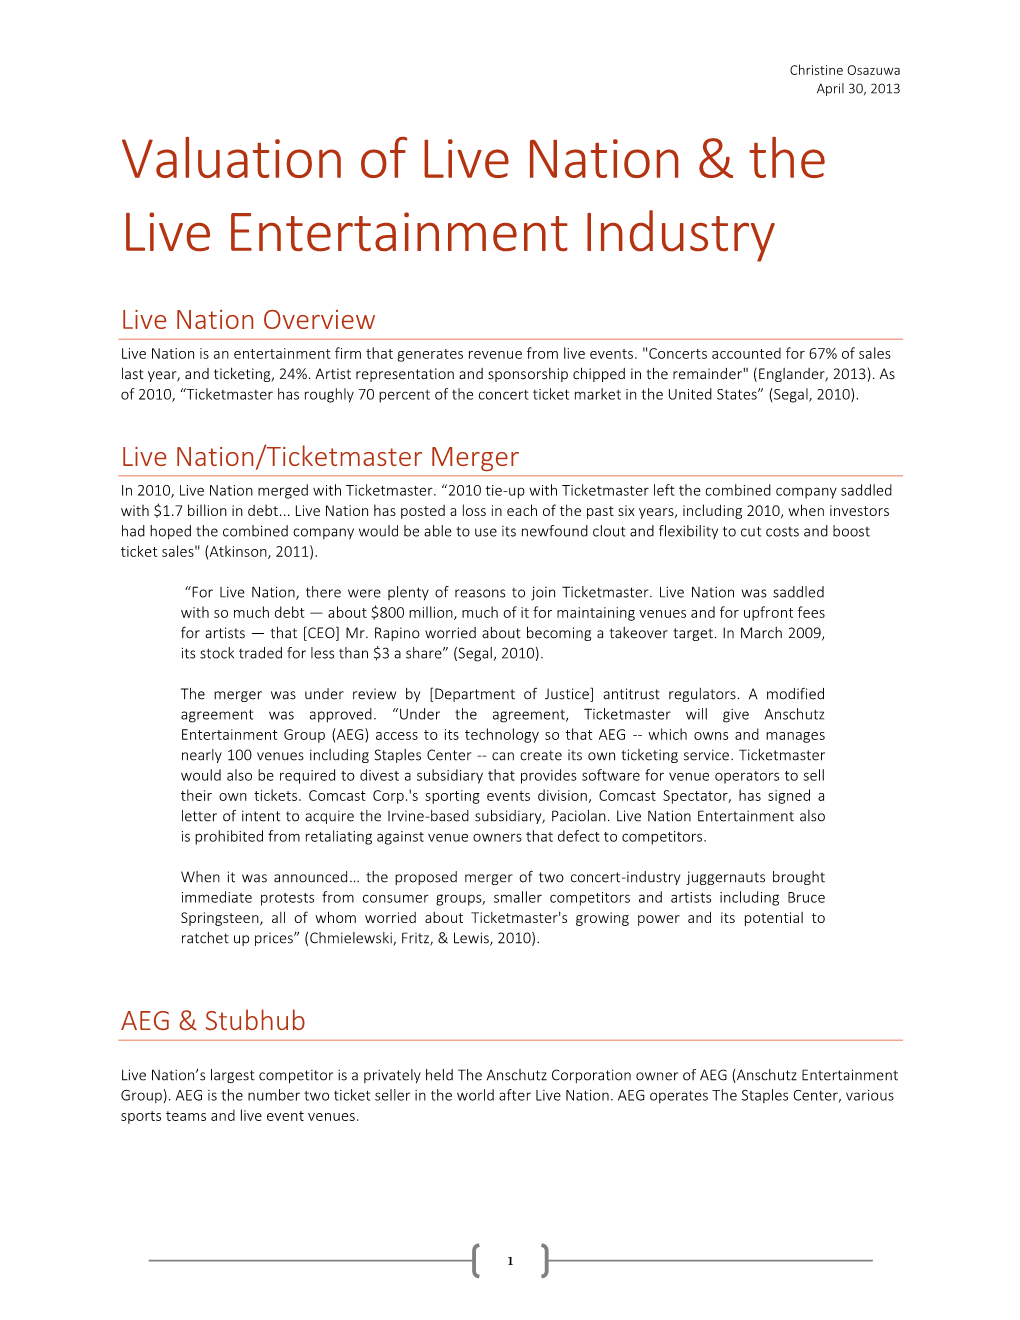 Valuation of Live Nation & the Live Entertainment Industry